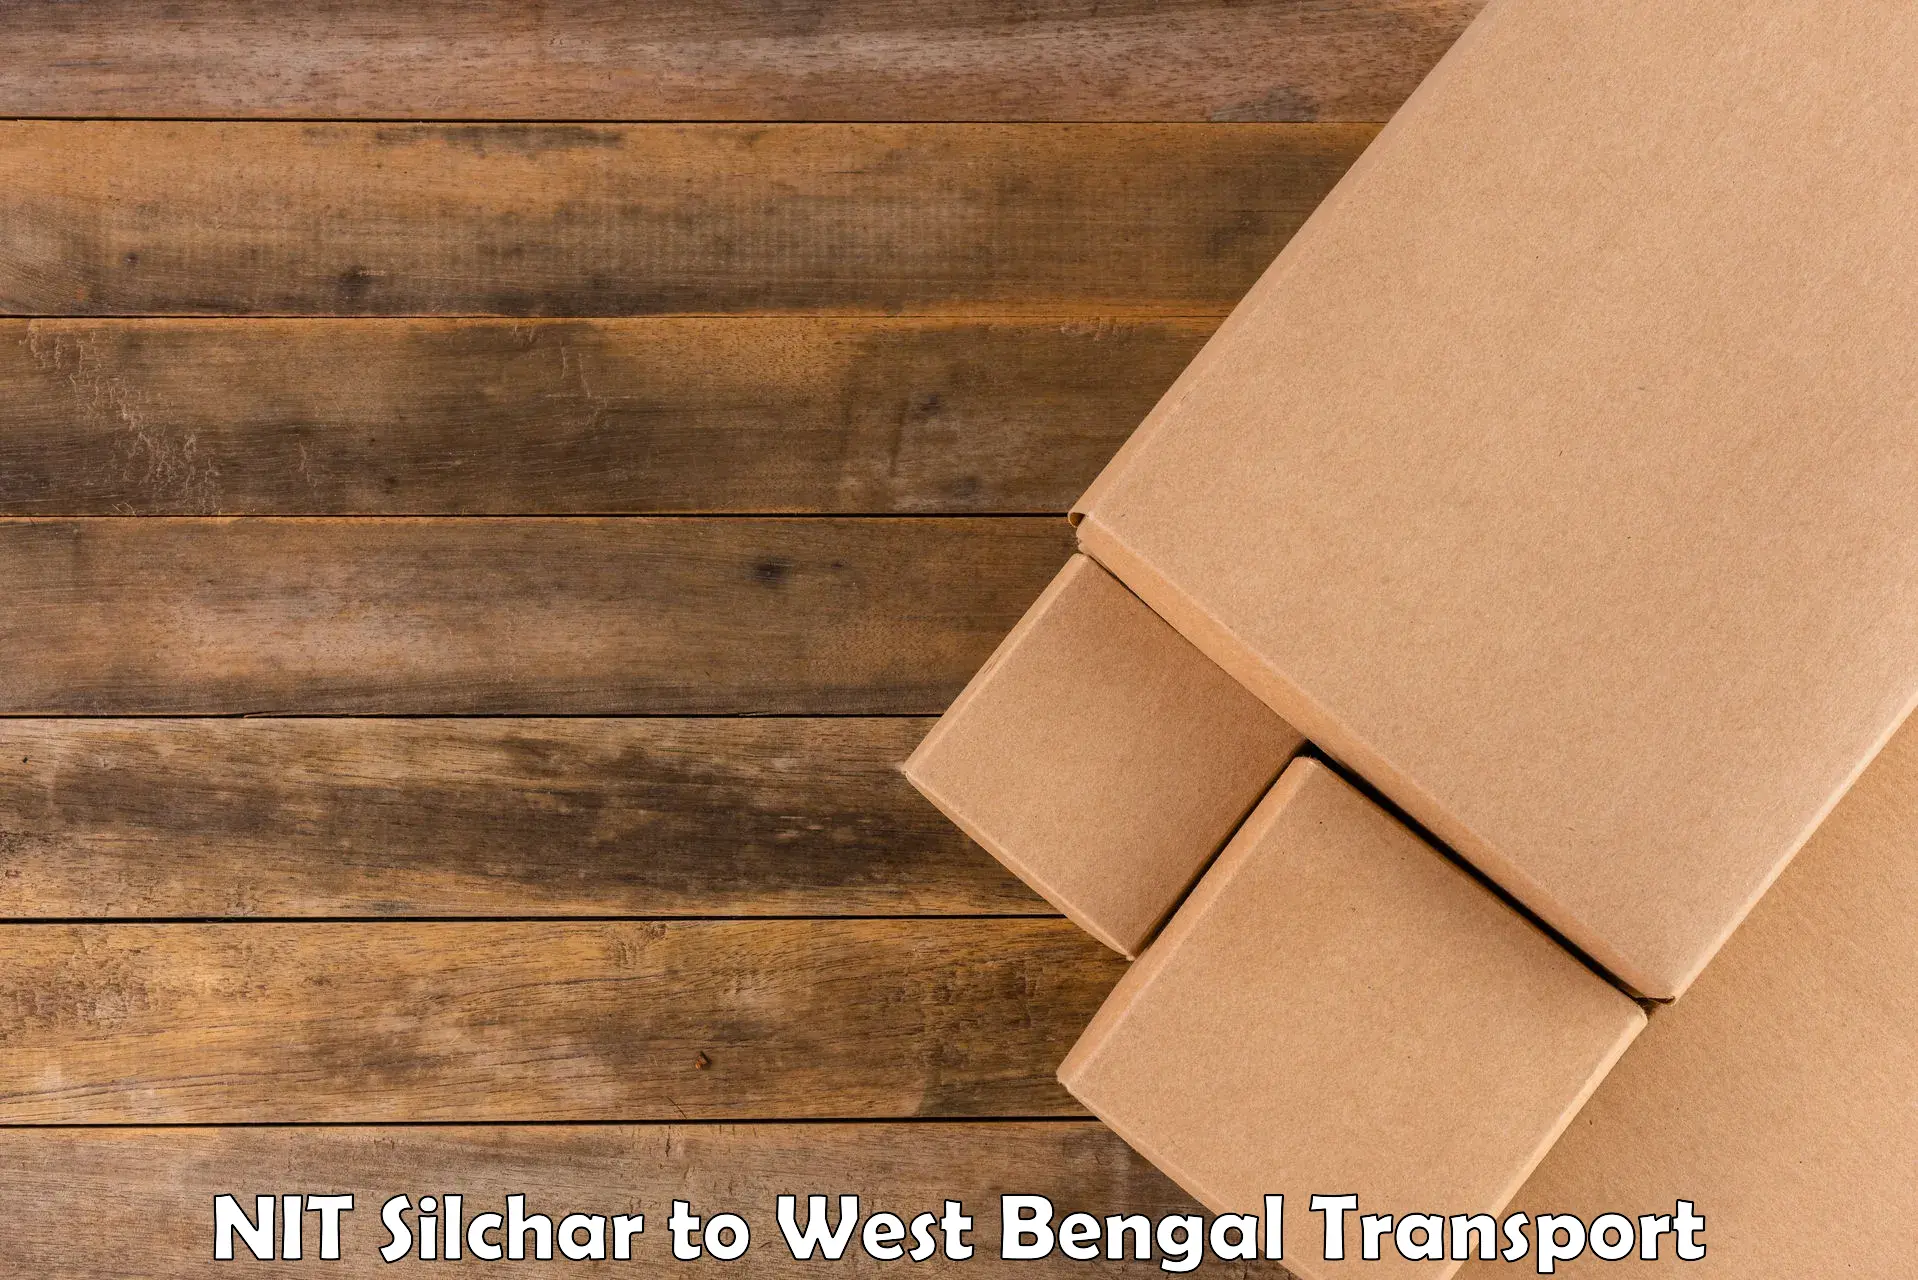 Cargo train transport services in NIT Silchar to Bandel